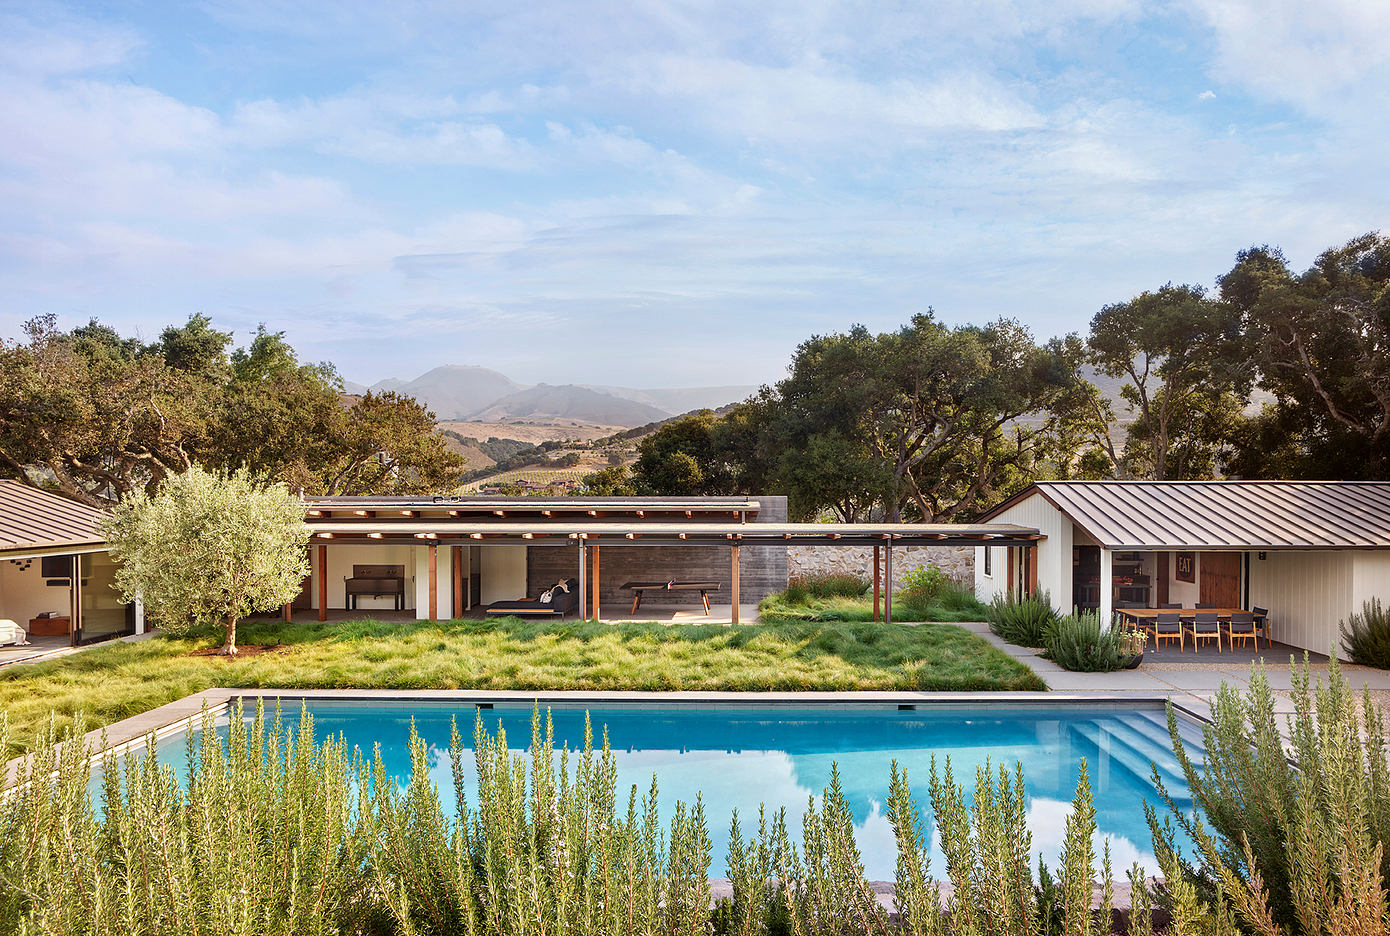 The Webster Poolhouse: A Marvel in Carmel Valley’s Landscape